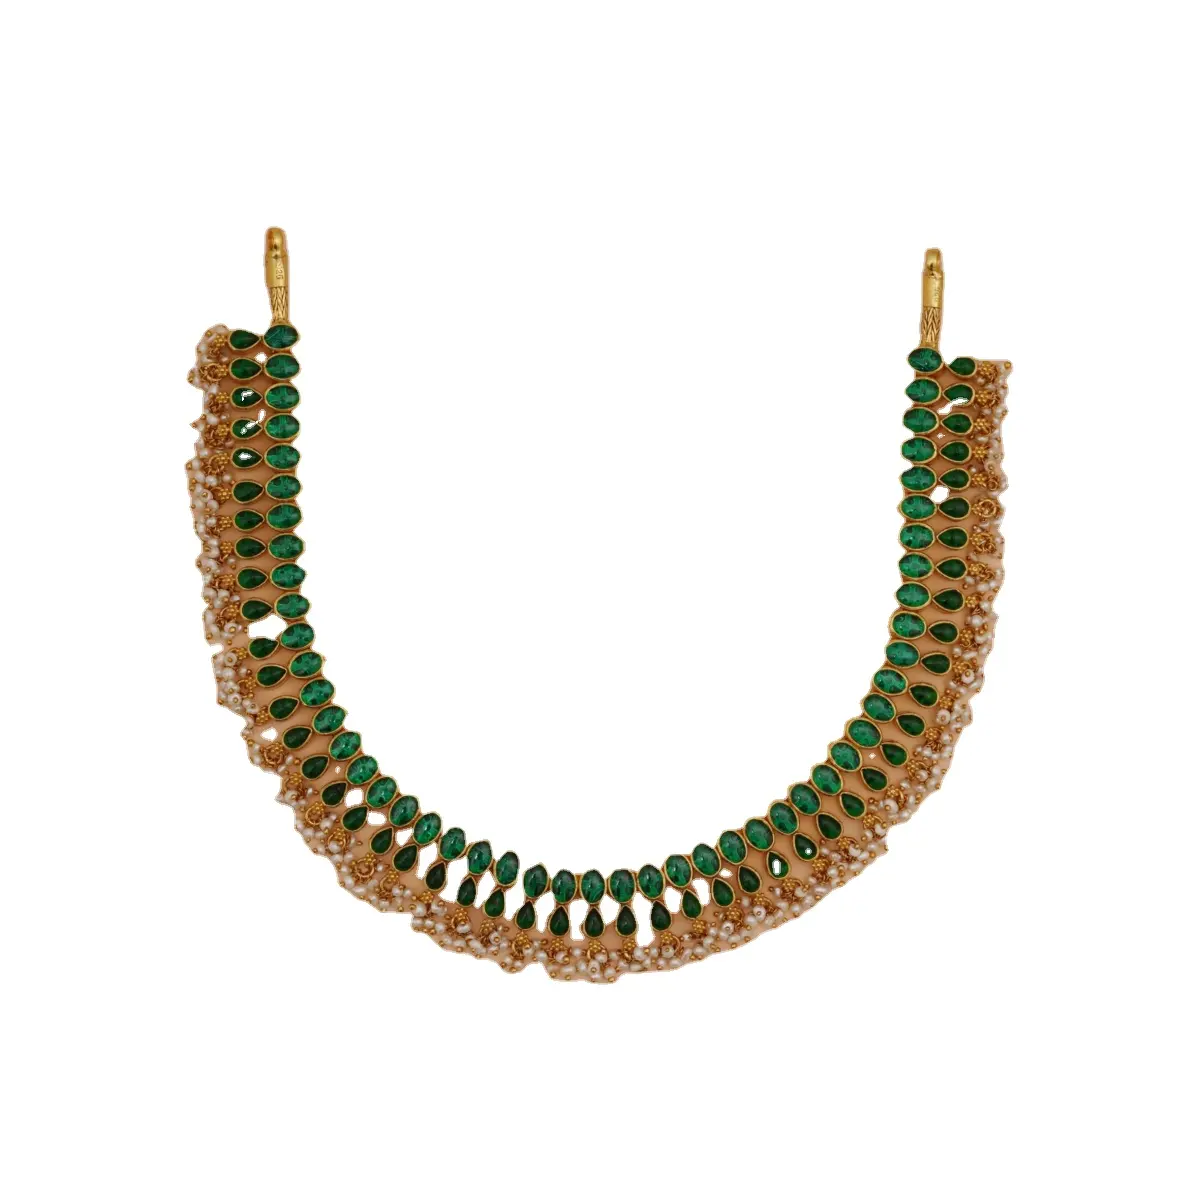 Best Indian Manufacturer Classic Green Stone Beaded Necklace with Pearls in Gold Plated 925 Sterling Silver at Hot Selling Price